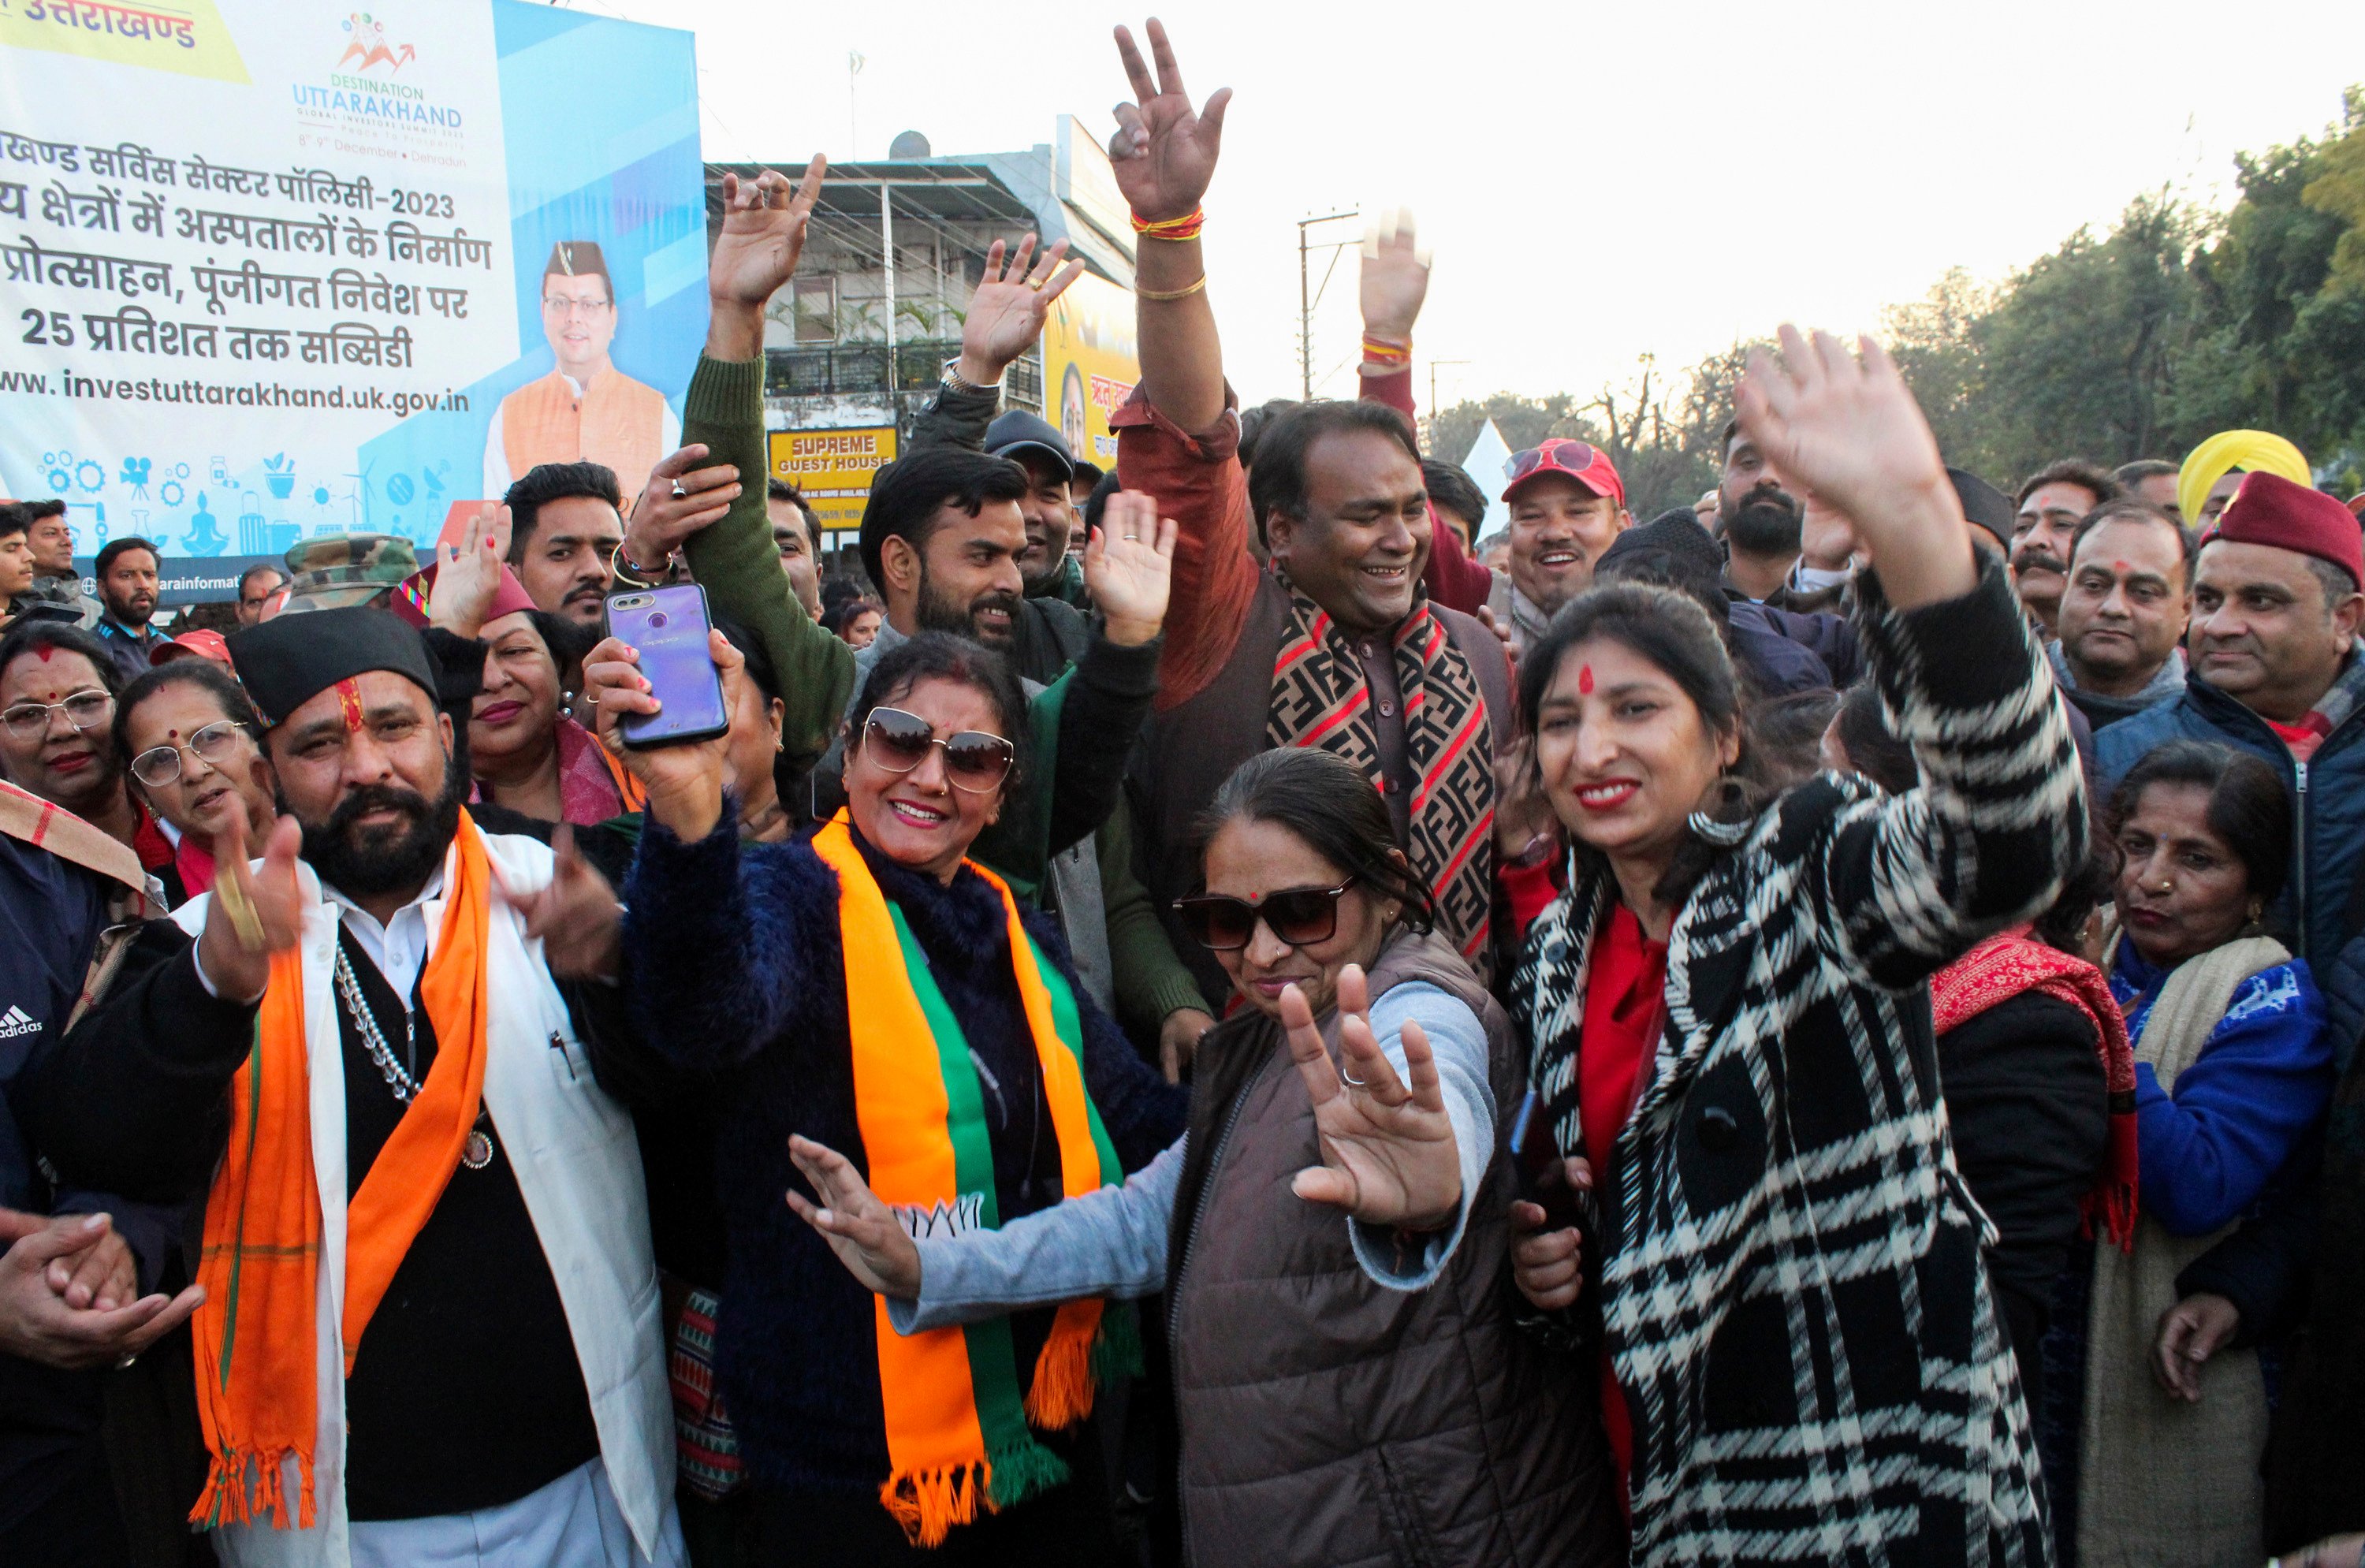 Bharatiya Janata Party supporters celebrate after Uttarakhand state lawmakers passed a uniform marriage law for all religions in Dehradun, India, on February 7. Photo: AP